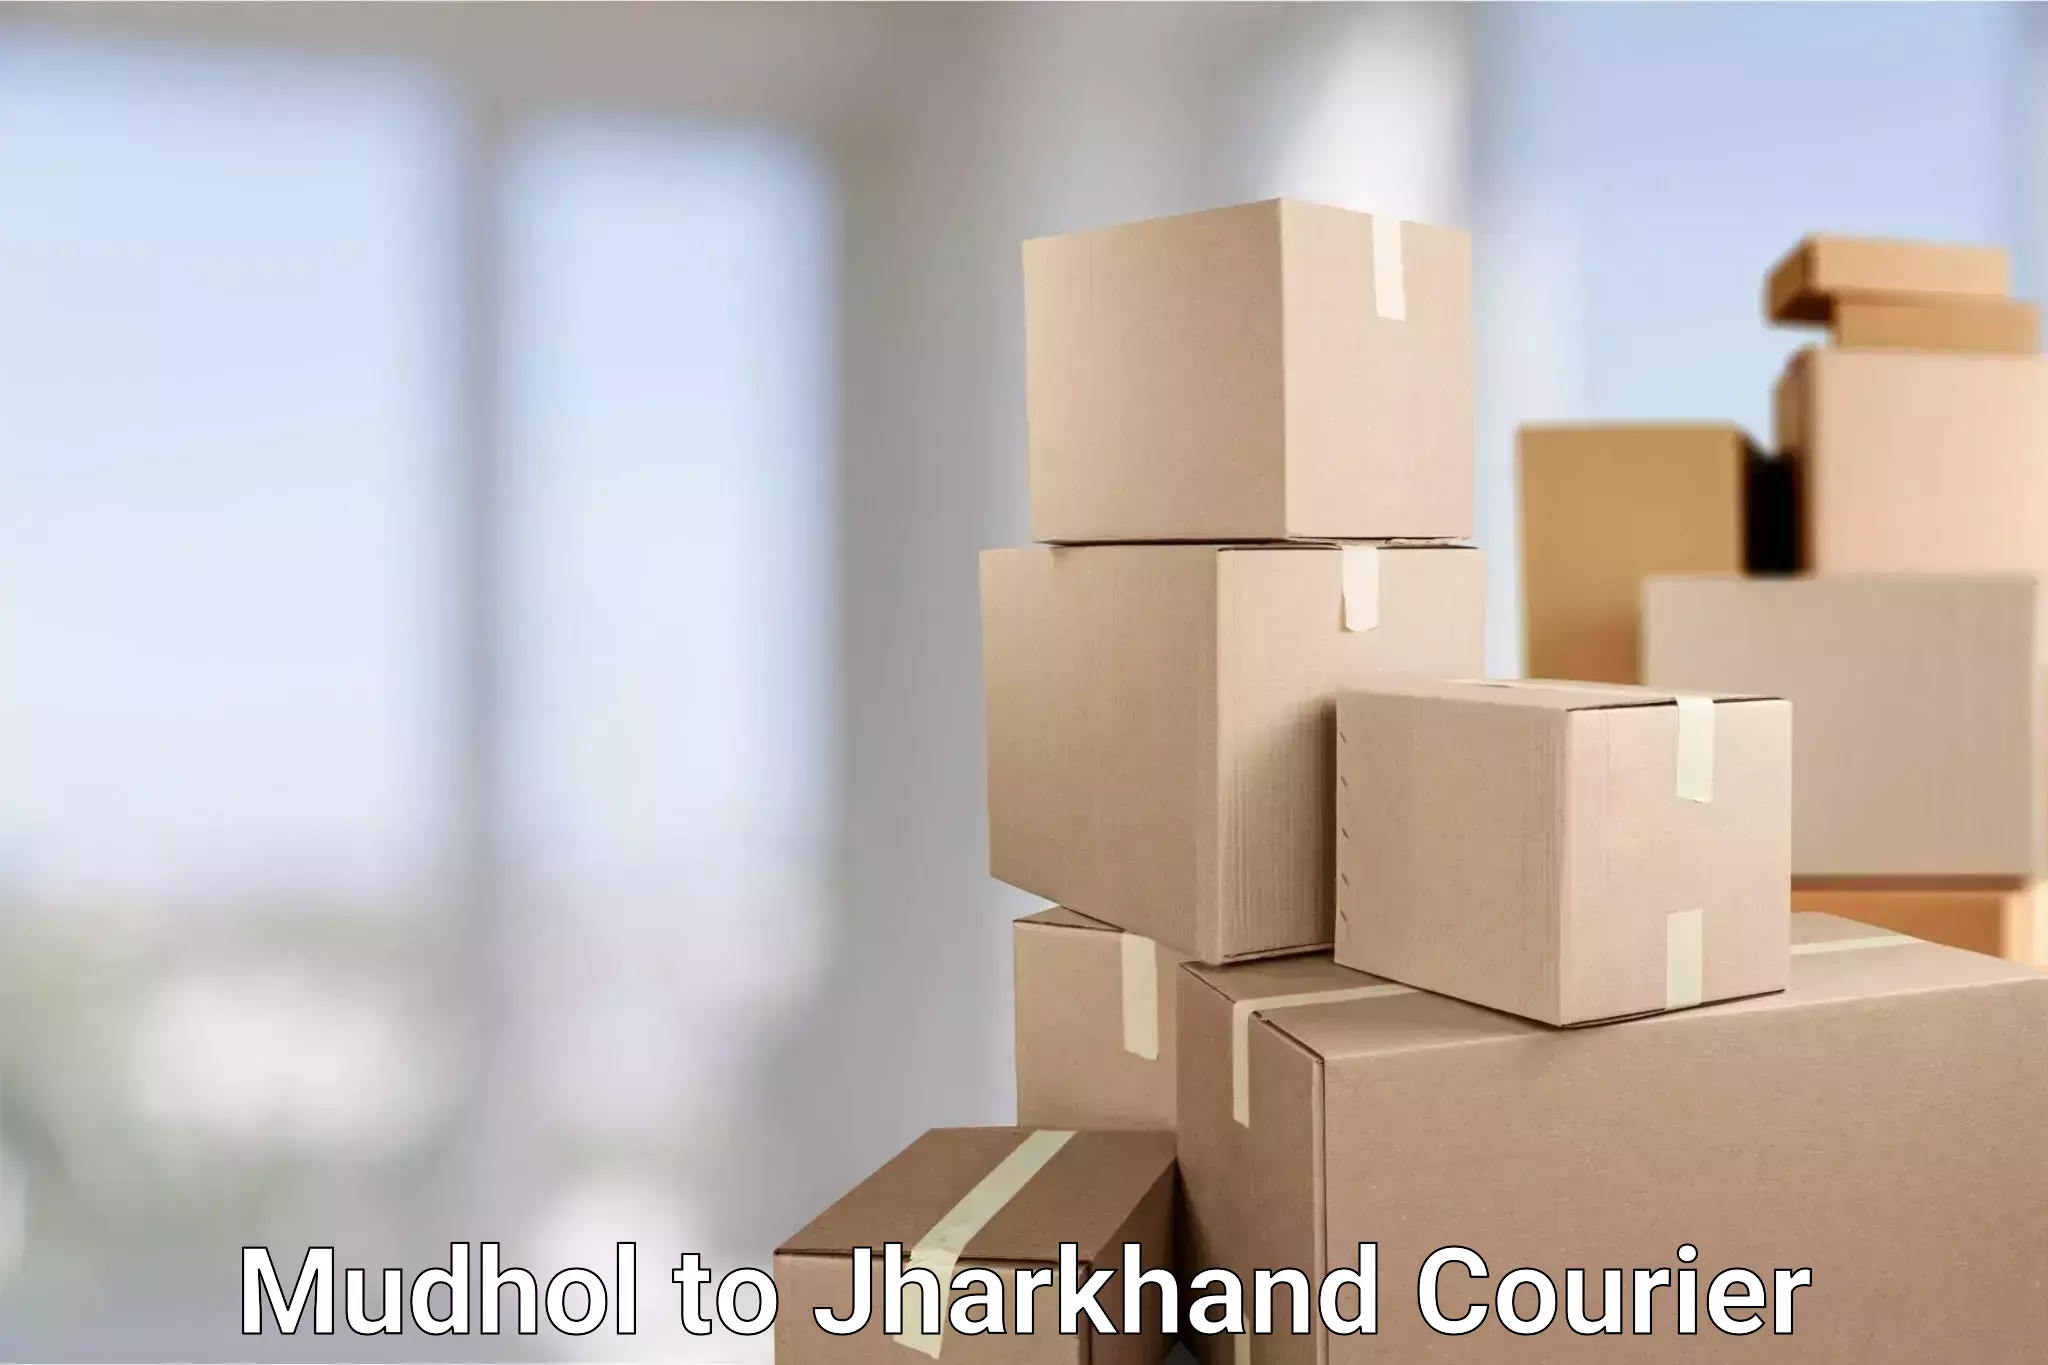 Seamless shipping experience Mudhol to Jharkhand